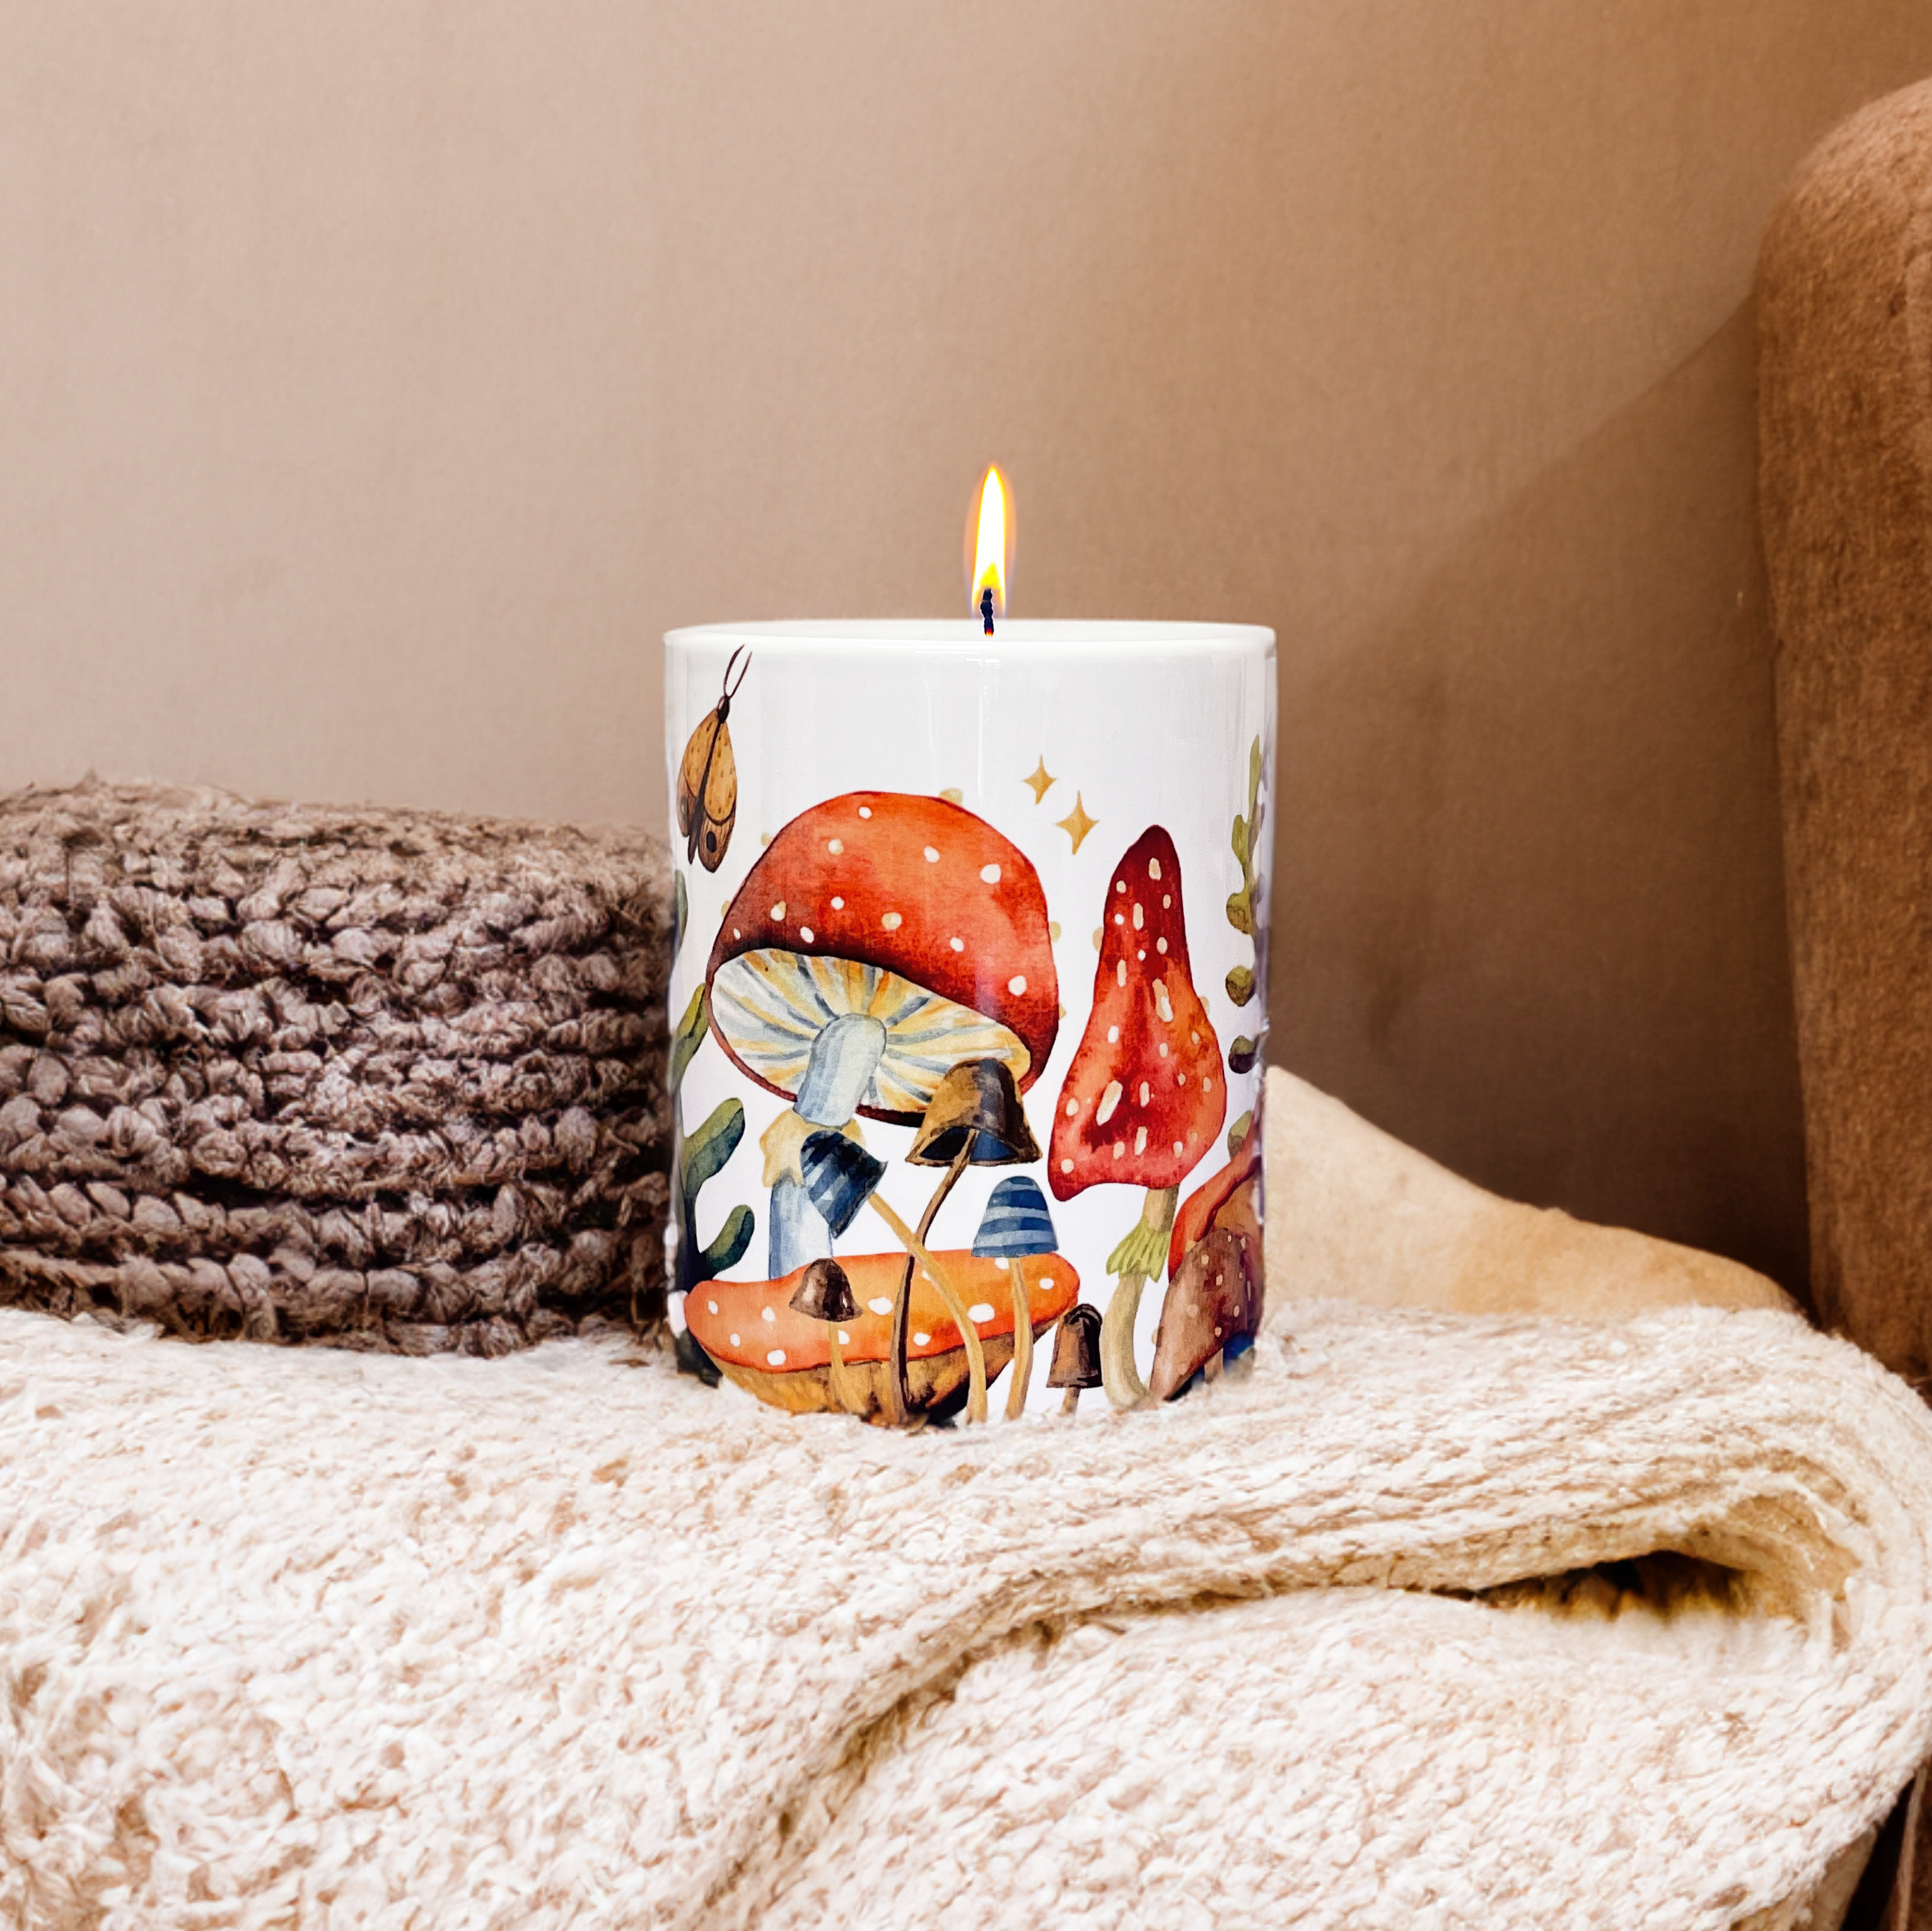 One Wick Scented Candle in Design Ceramic Vessel featuring Watercolor Whimsical Mushrooms